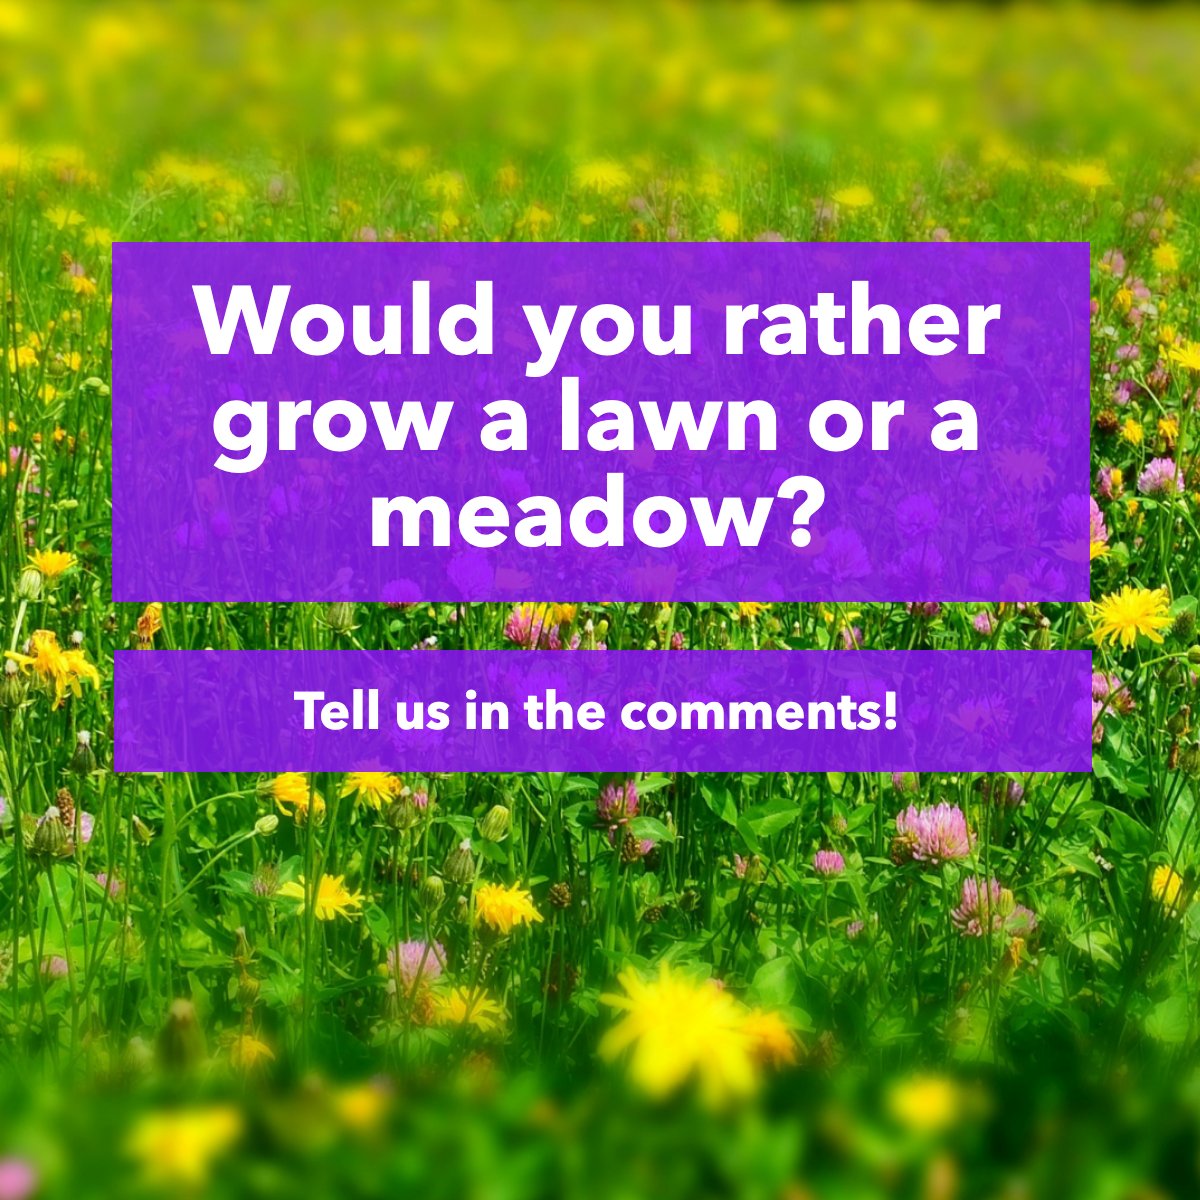 Which one do you prefer? 🍃

#lawn #meadow #greenfield #landscapegardening
 #mainerealestate #homesforsale #floridarealestate #selleragent #buyeragent #listingagent #homeimprovements #mainerealestatecompany #mainerealtor #dejalett #tophomesgroup